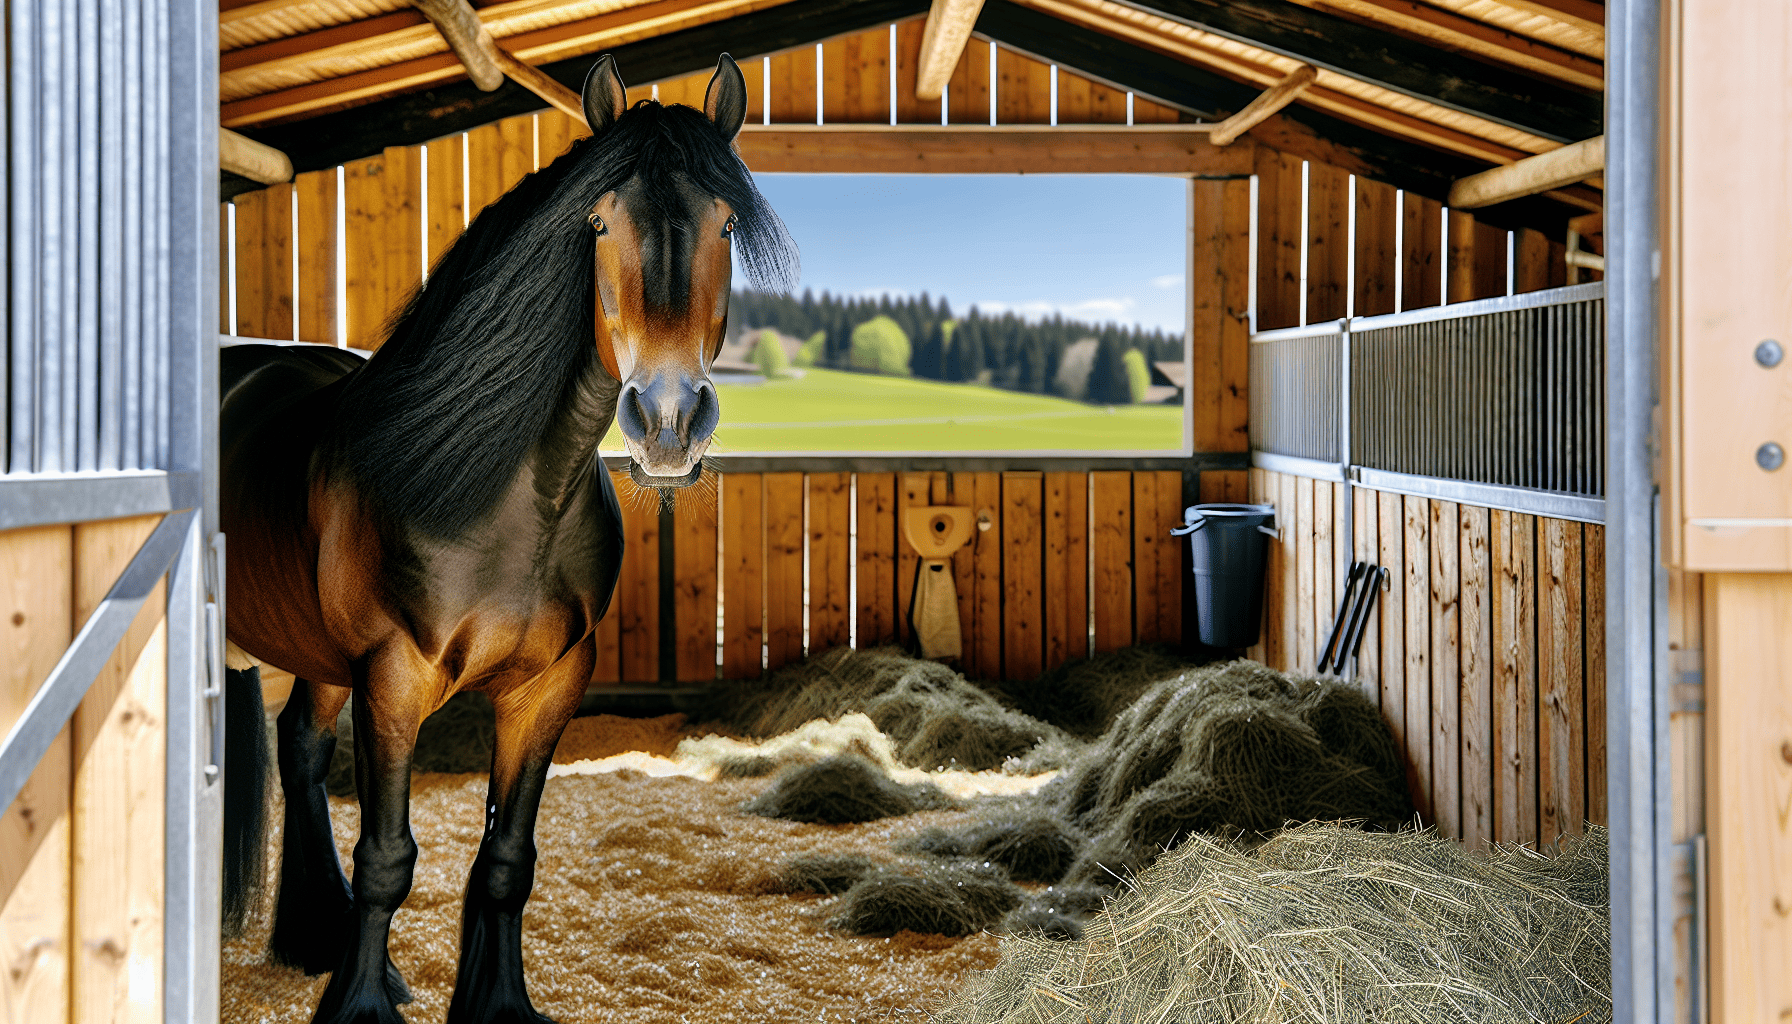 Horse in a well-maintained stable